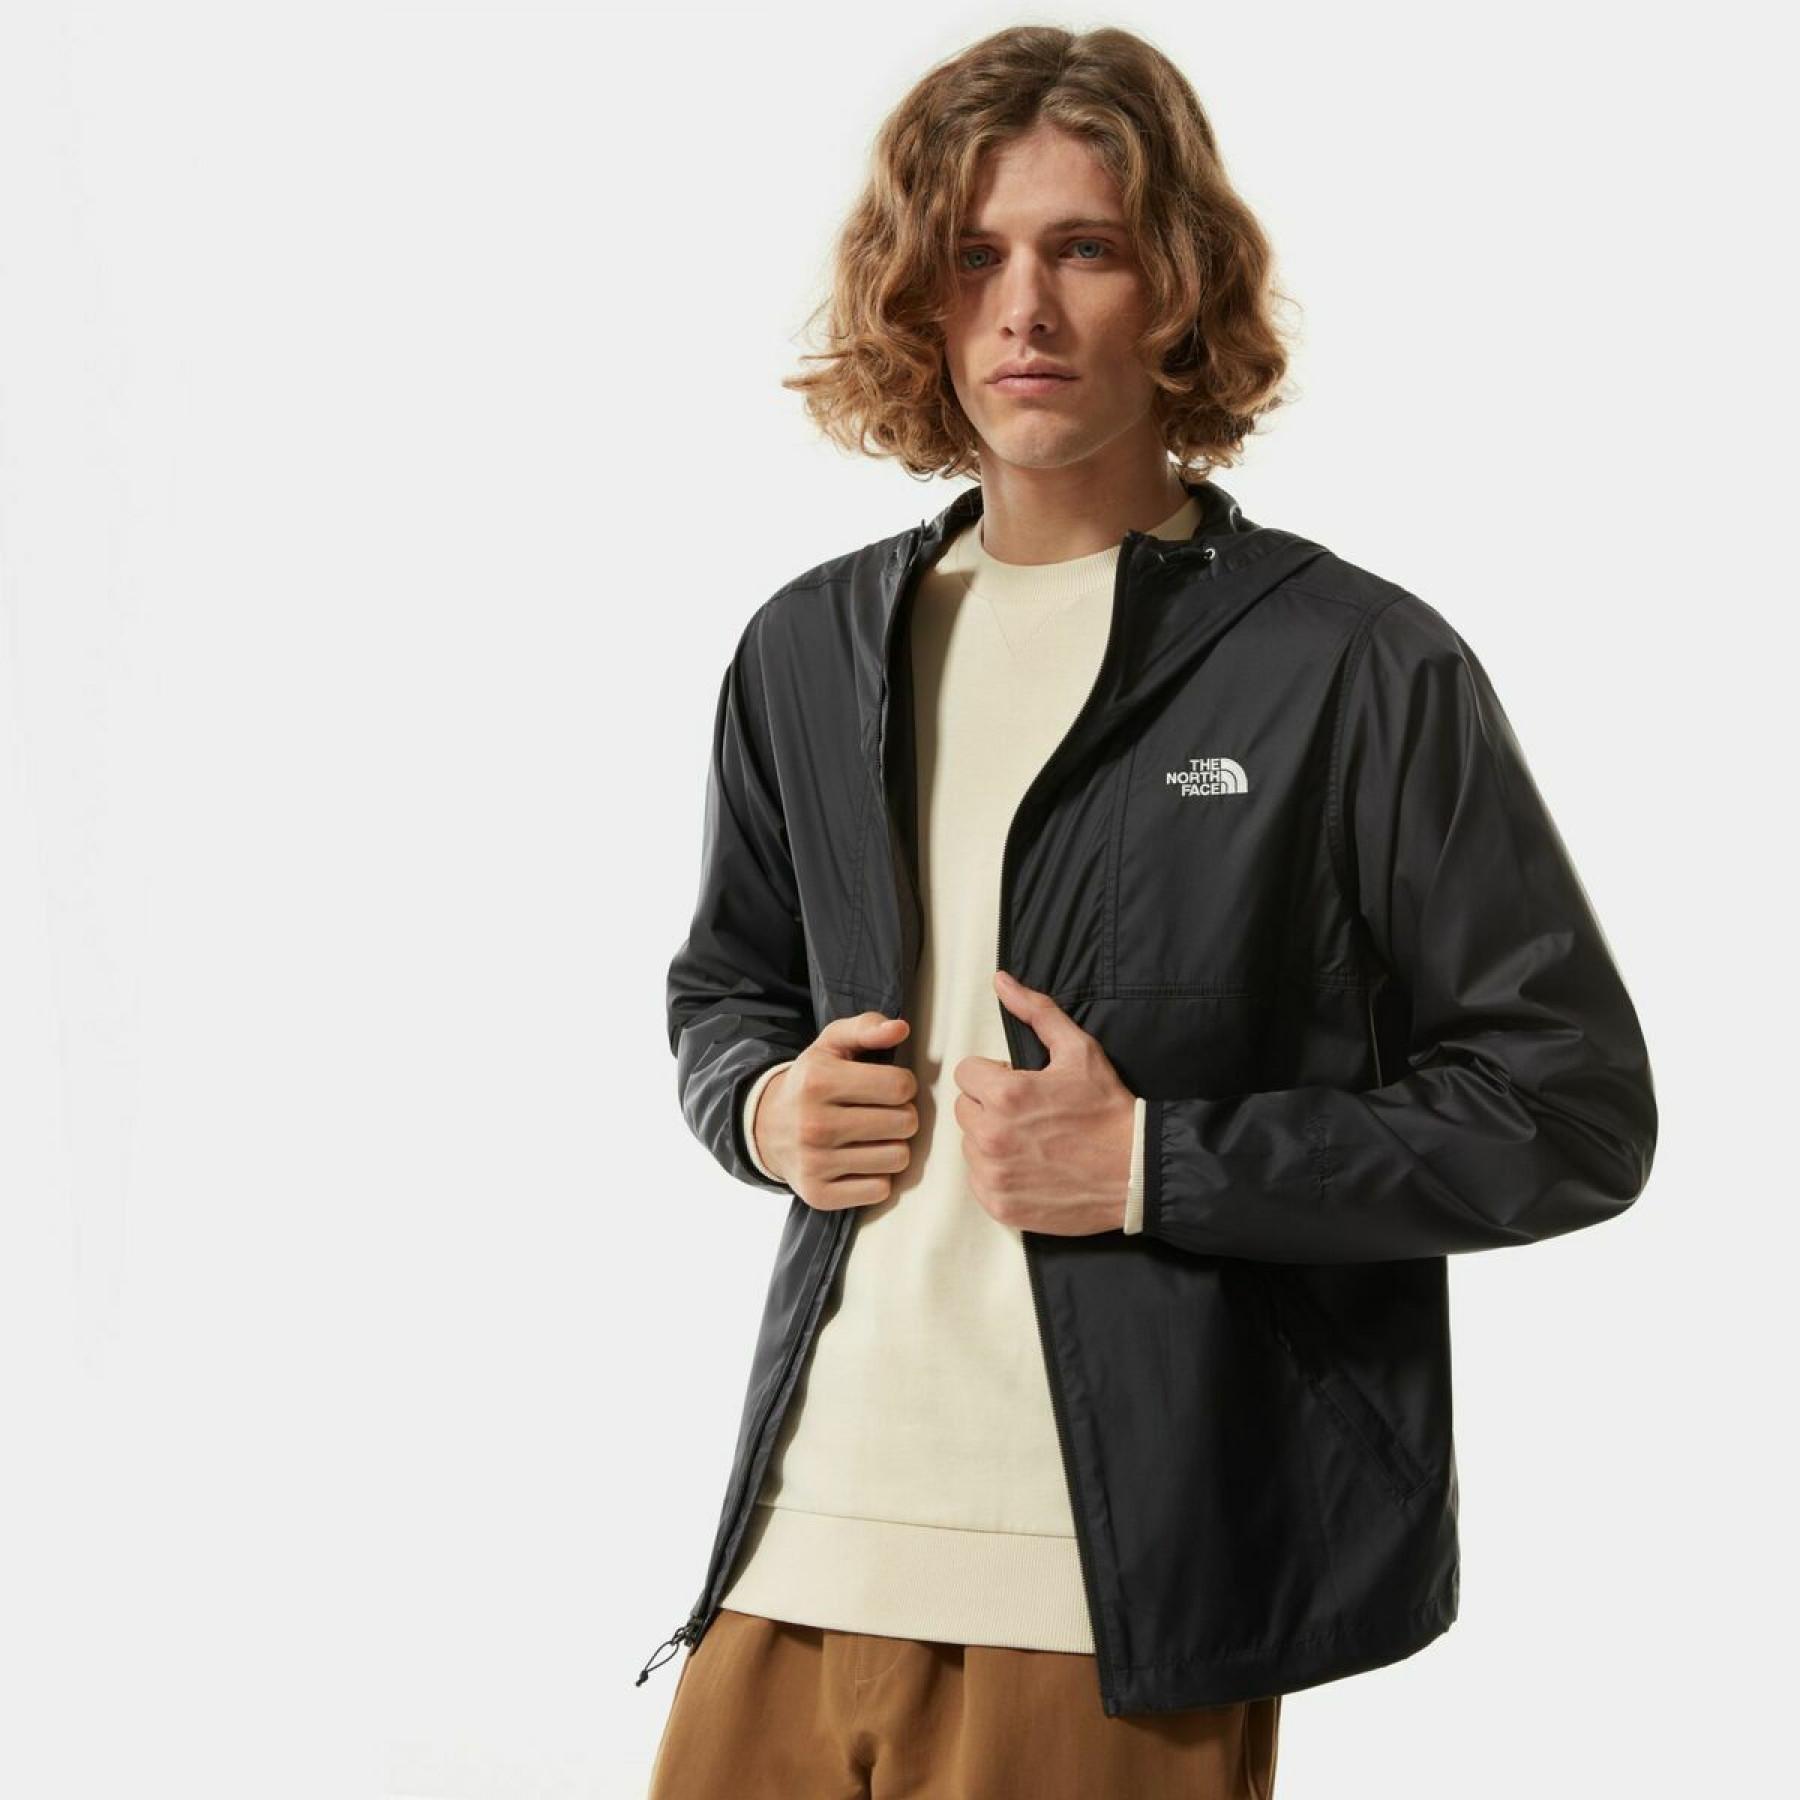 Jacke The North Face Cyclone